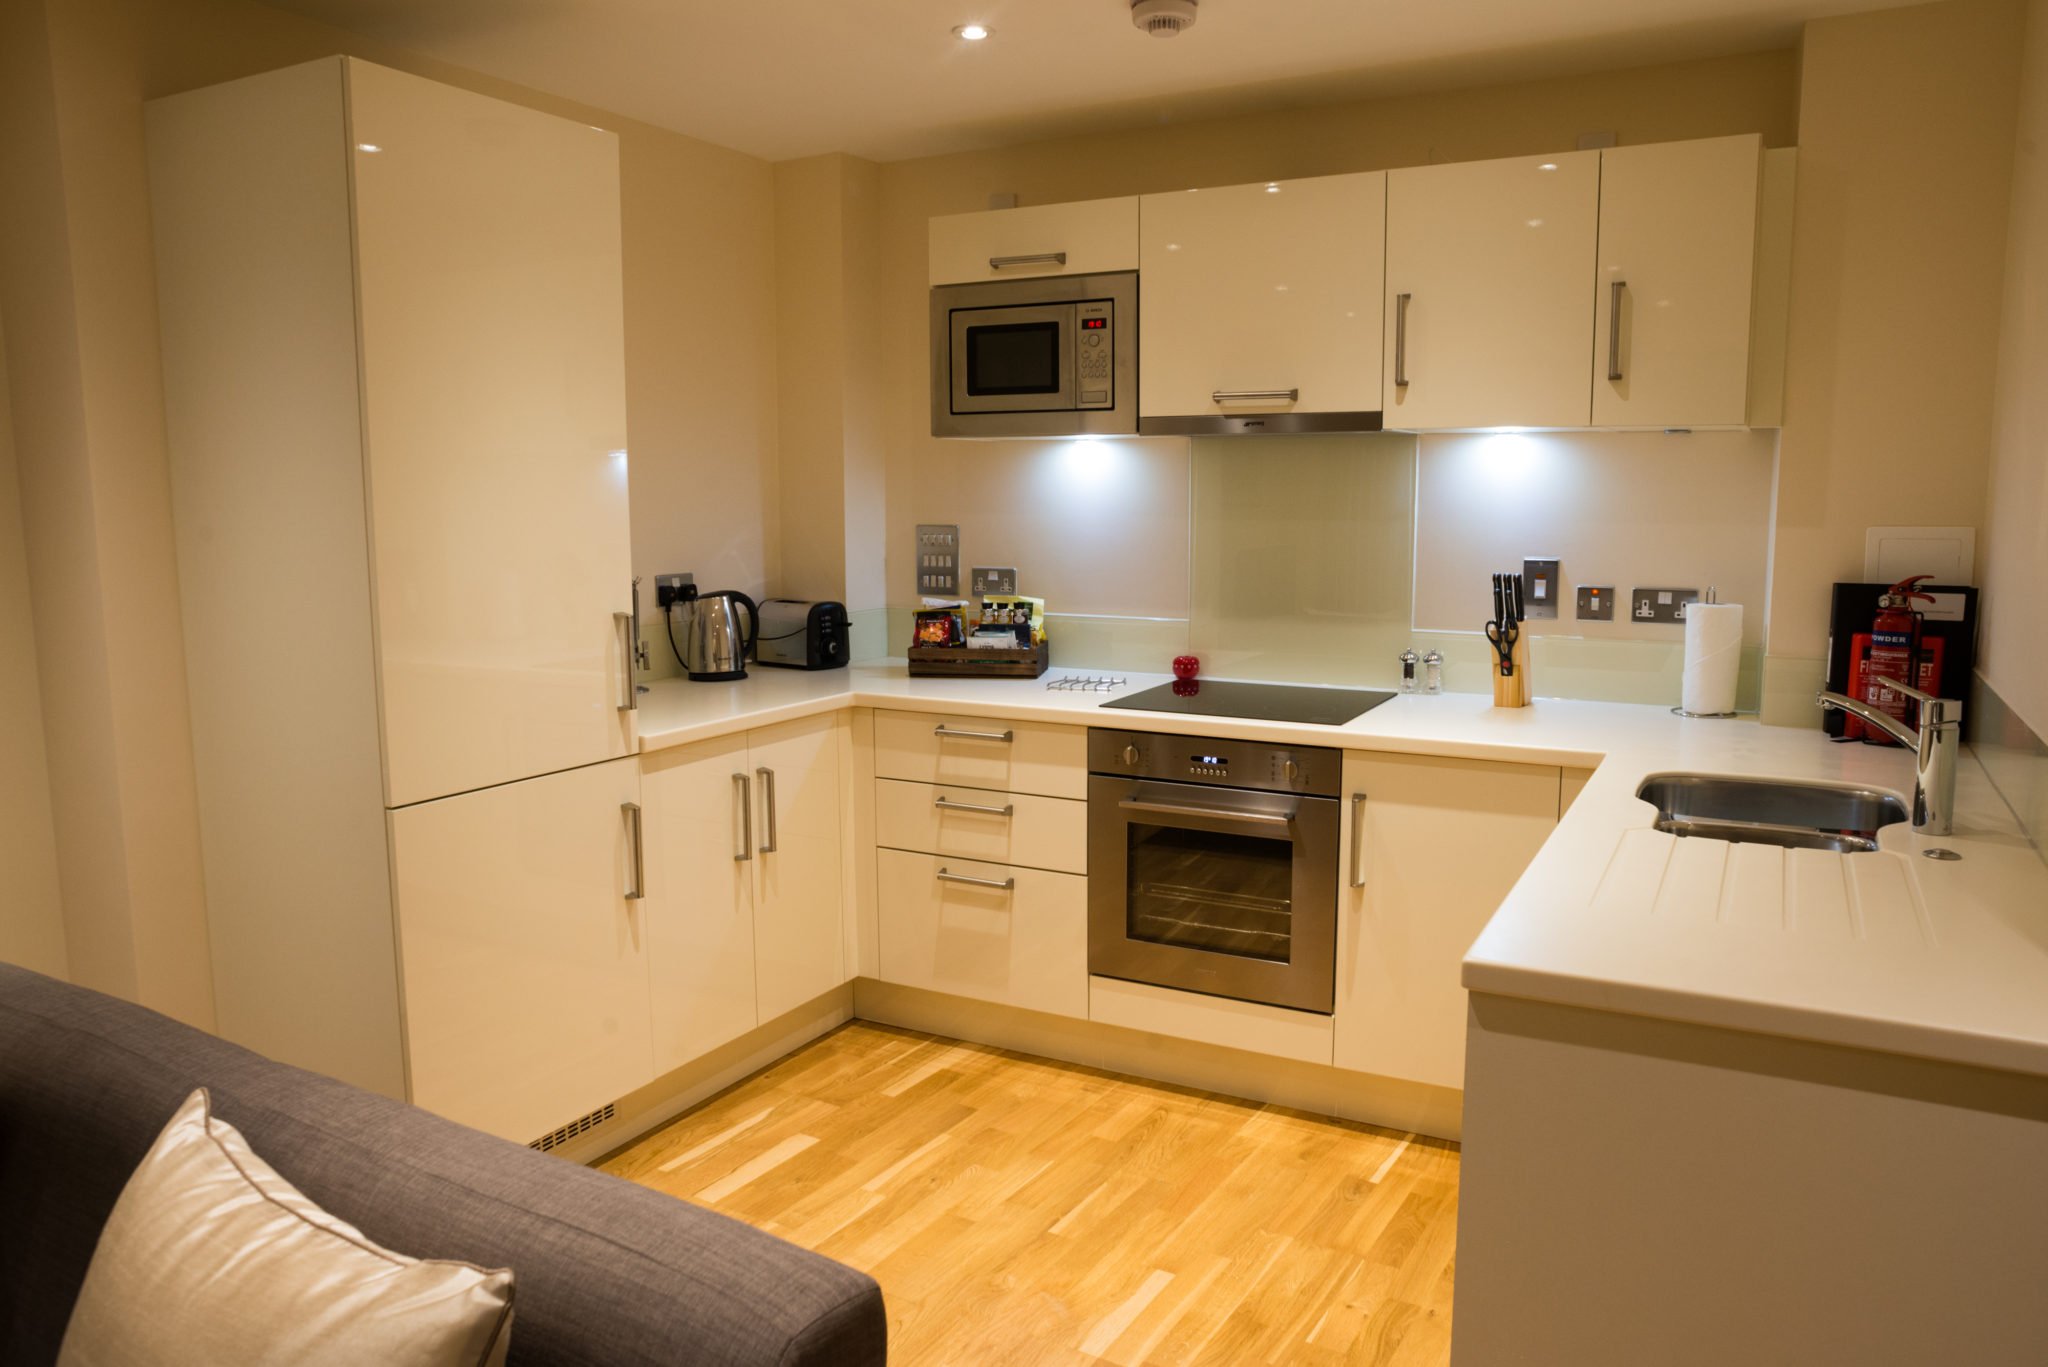 City-Of-London-Serviced-Accommodation-available-now!-Book-Cheap-Short-Let-Arc-House-Apartments-in-the-City-of-London,-with-Free-Wi-Fi,-Fully-equipped-kitchen-&-a-Welcome-Basket!-Book-Now!-Call:-0208-6913920